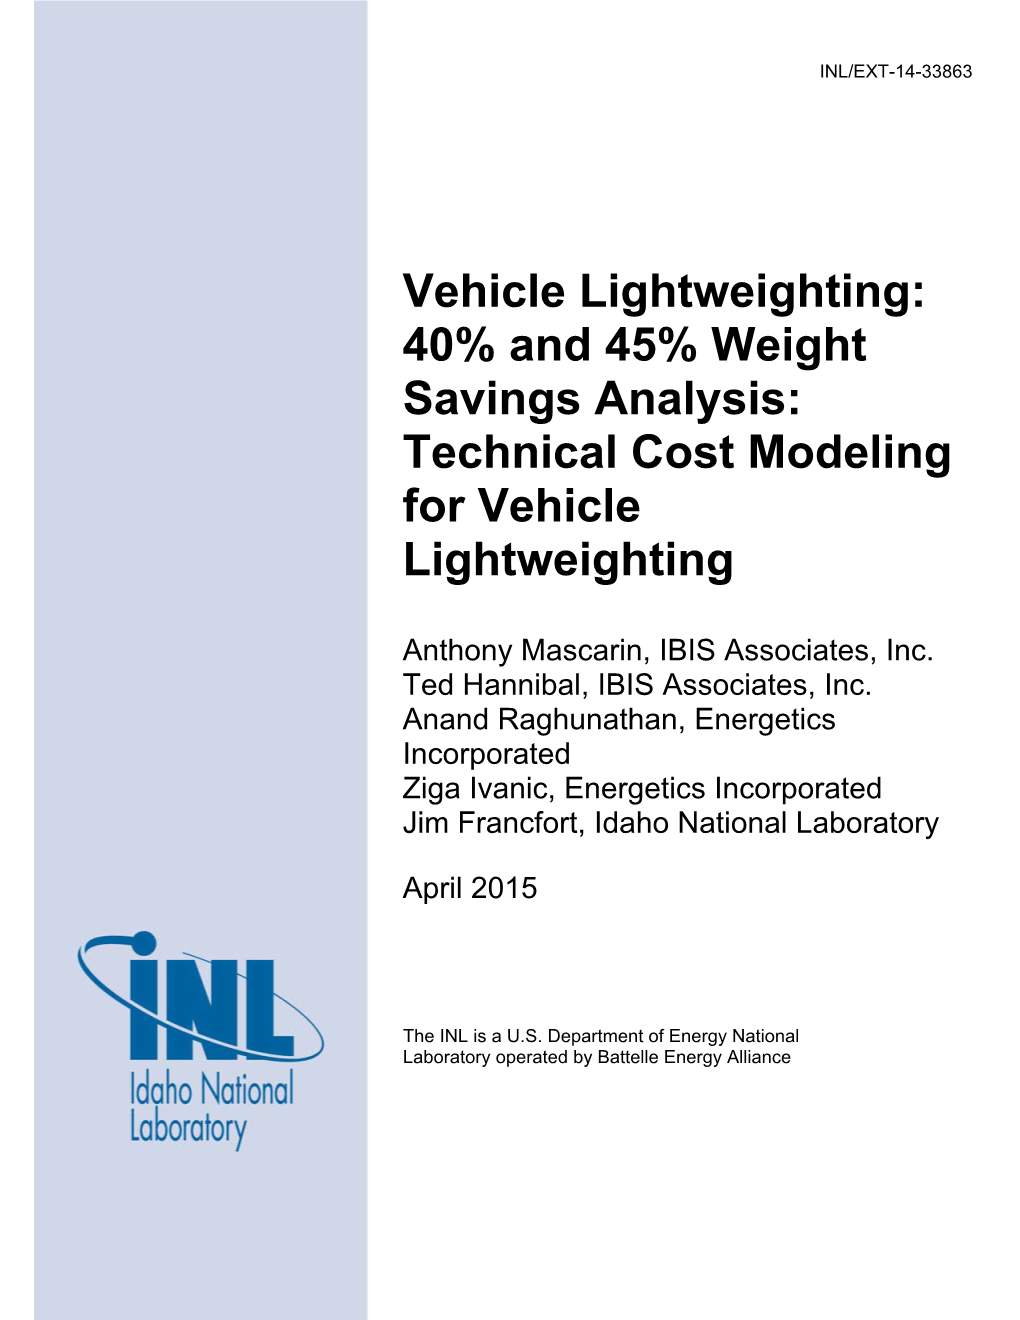 40% and 45% Weight Savings Analysis: Technical Cost Modeling for Vehicle Lightweighting